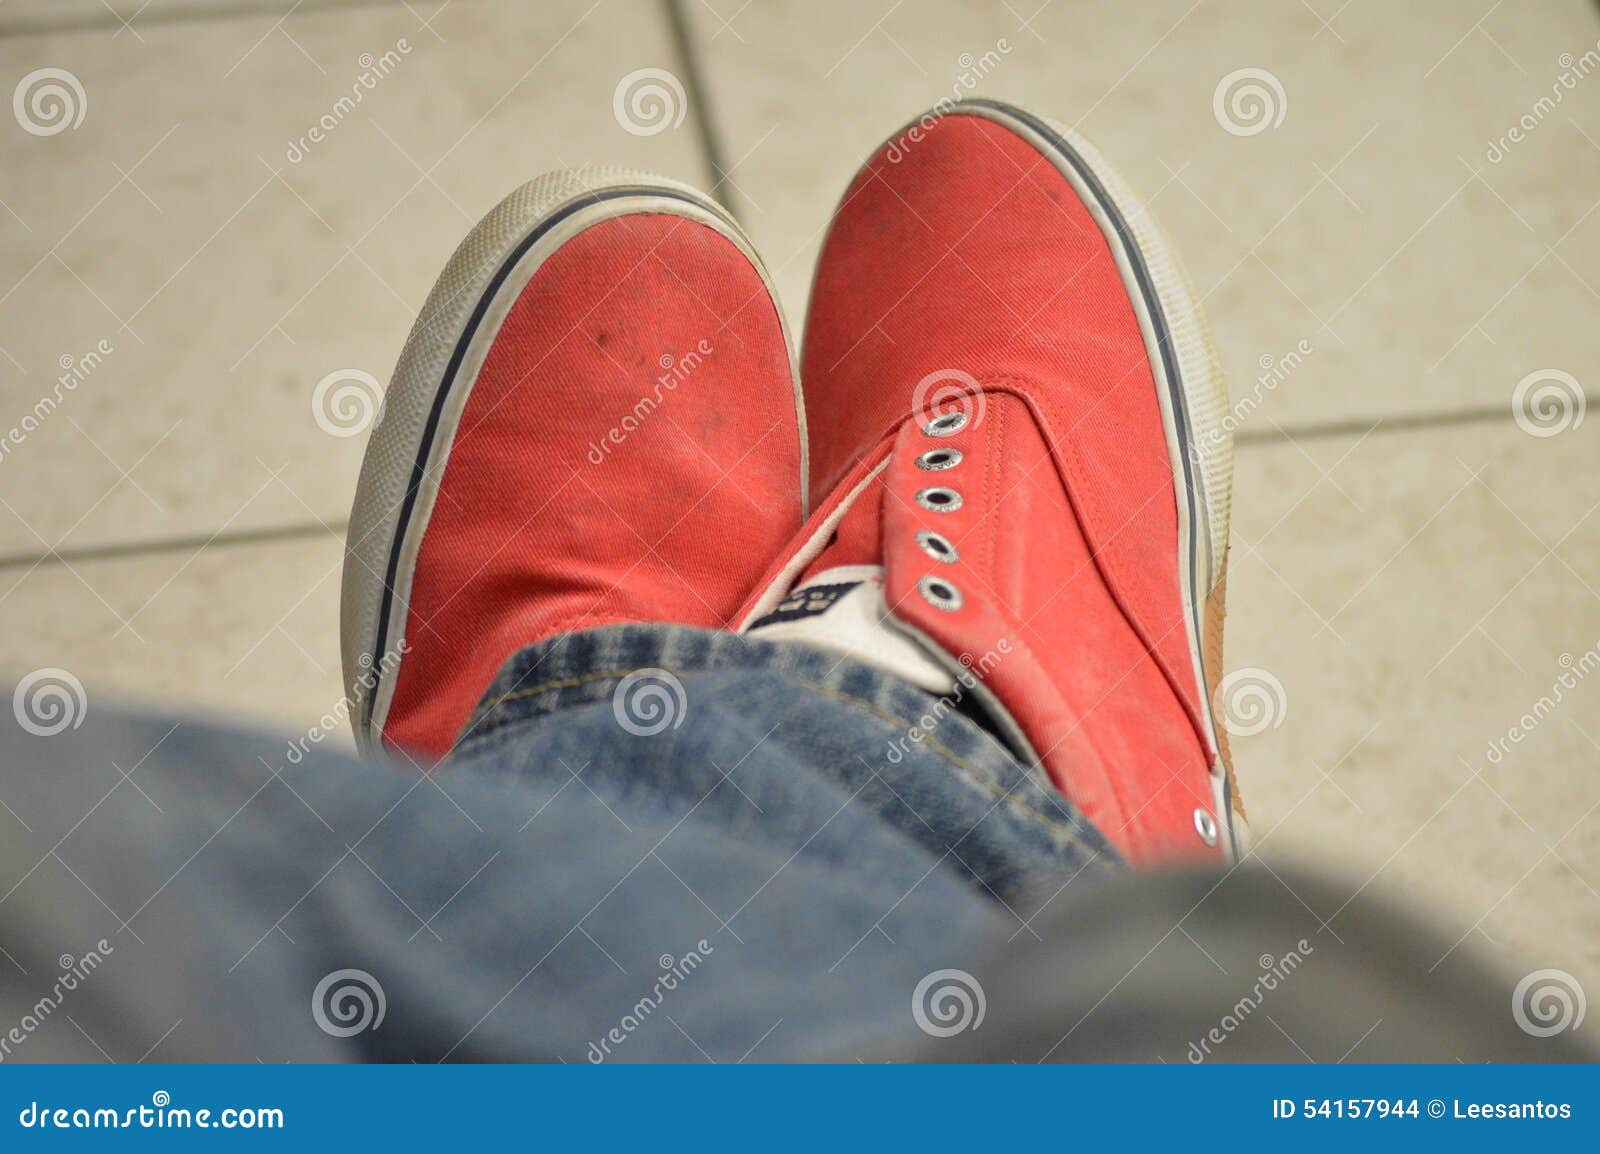 Person Wearing Red Shoes and Jeans Crossed Legs Stock Photo - Image of ...